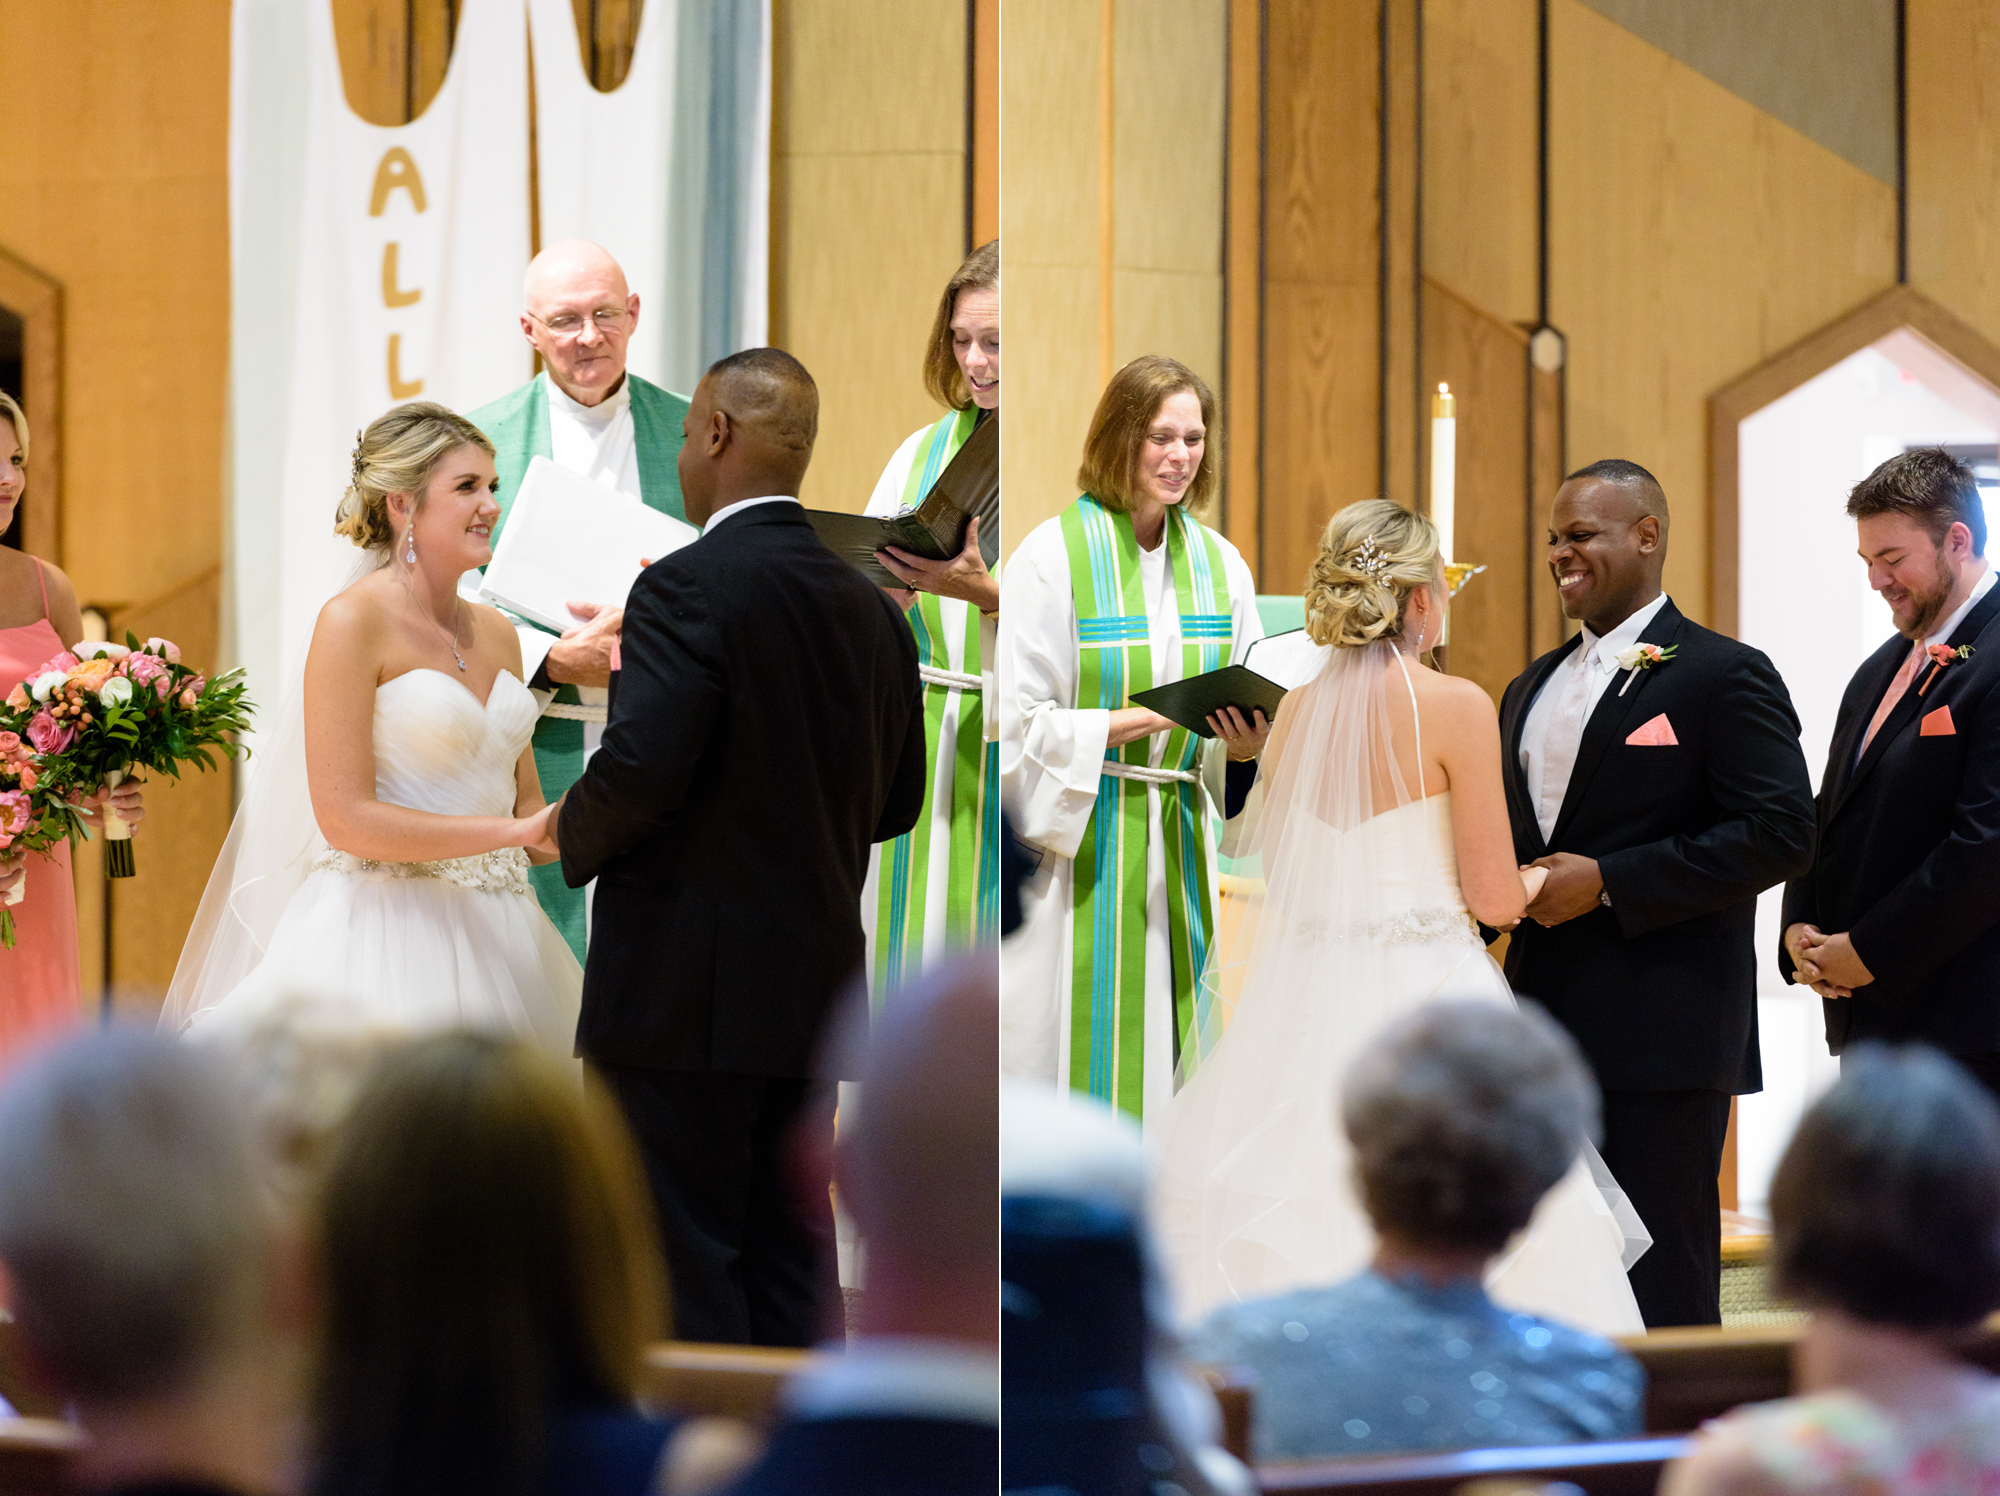 Wedding ceremony at Christ the King Lutheran Church